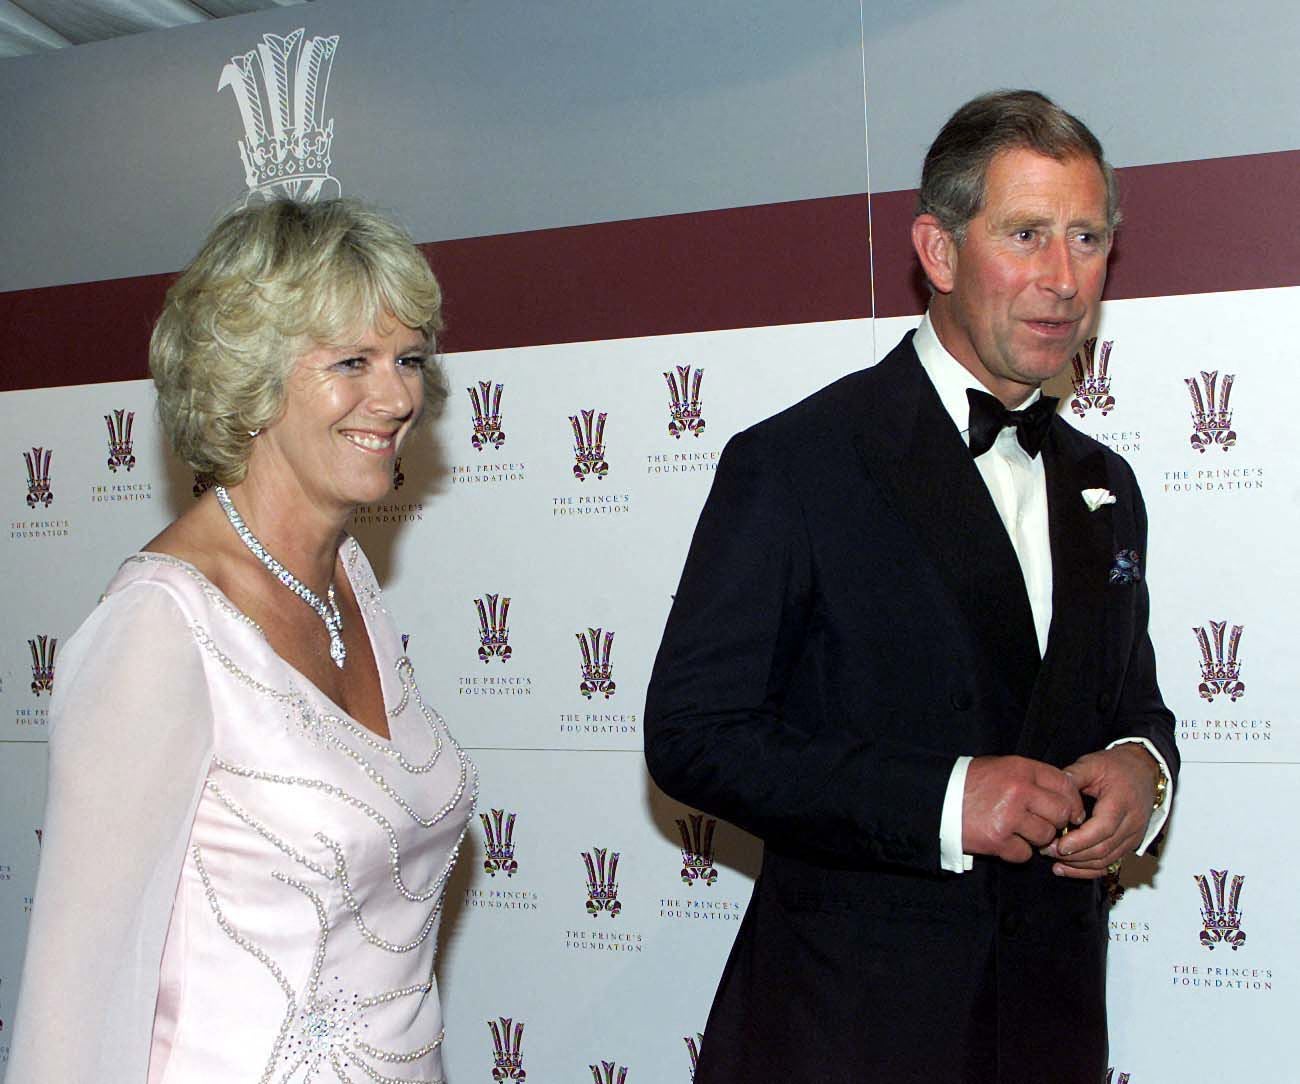 The Prince of Wales and Camilla Parker Bowles walk through to The Gala Dinner at The Prince's Foundation in London late 20 June 2000